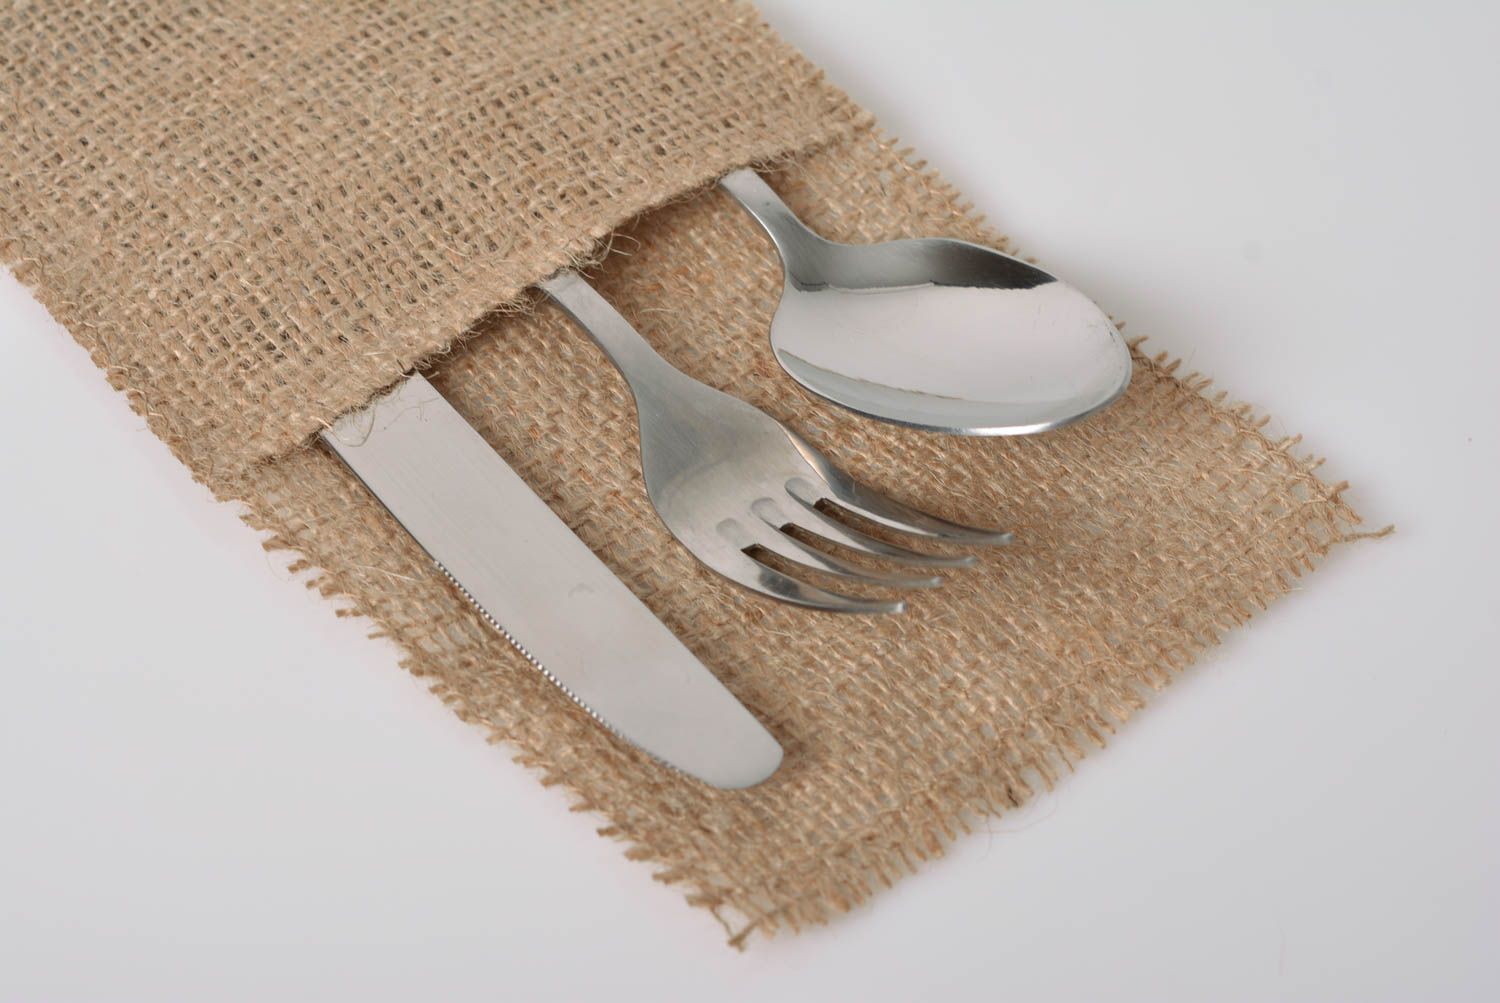 Case for cutlery made of burlap handmade decorative kitchen accessory photo 3